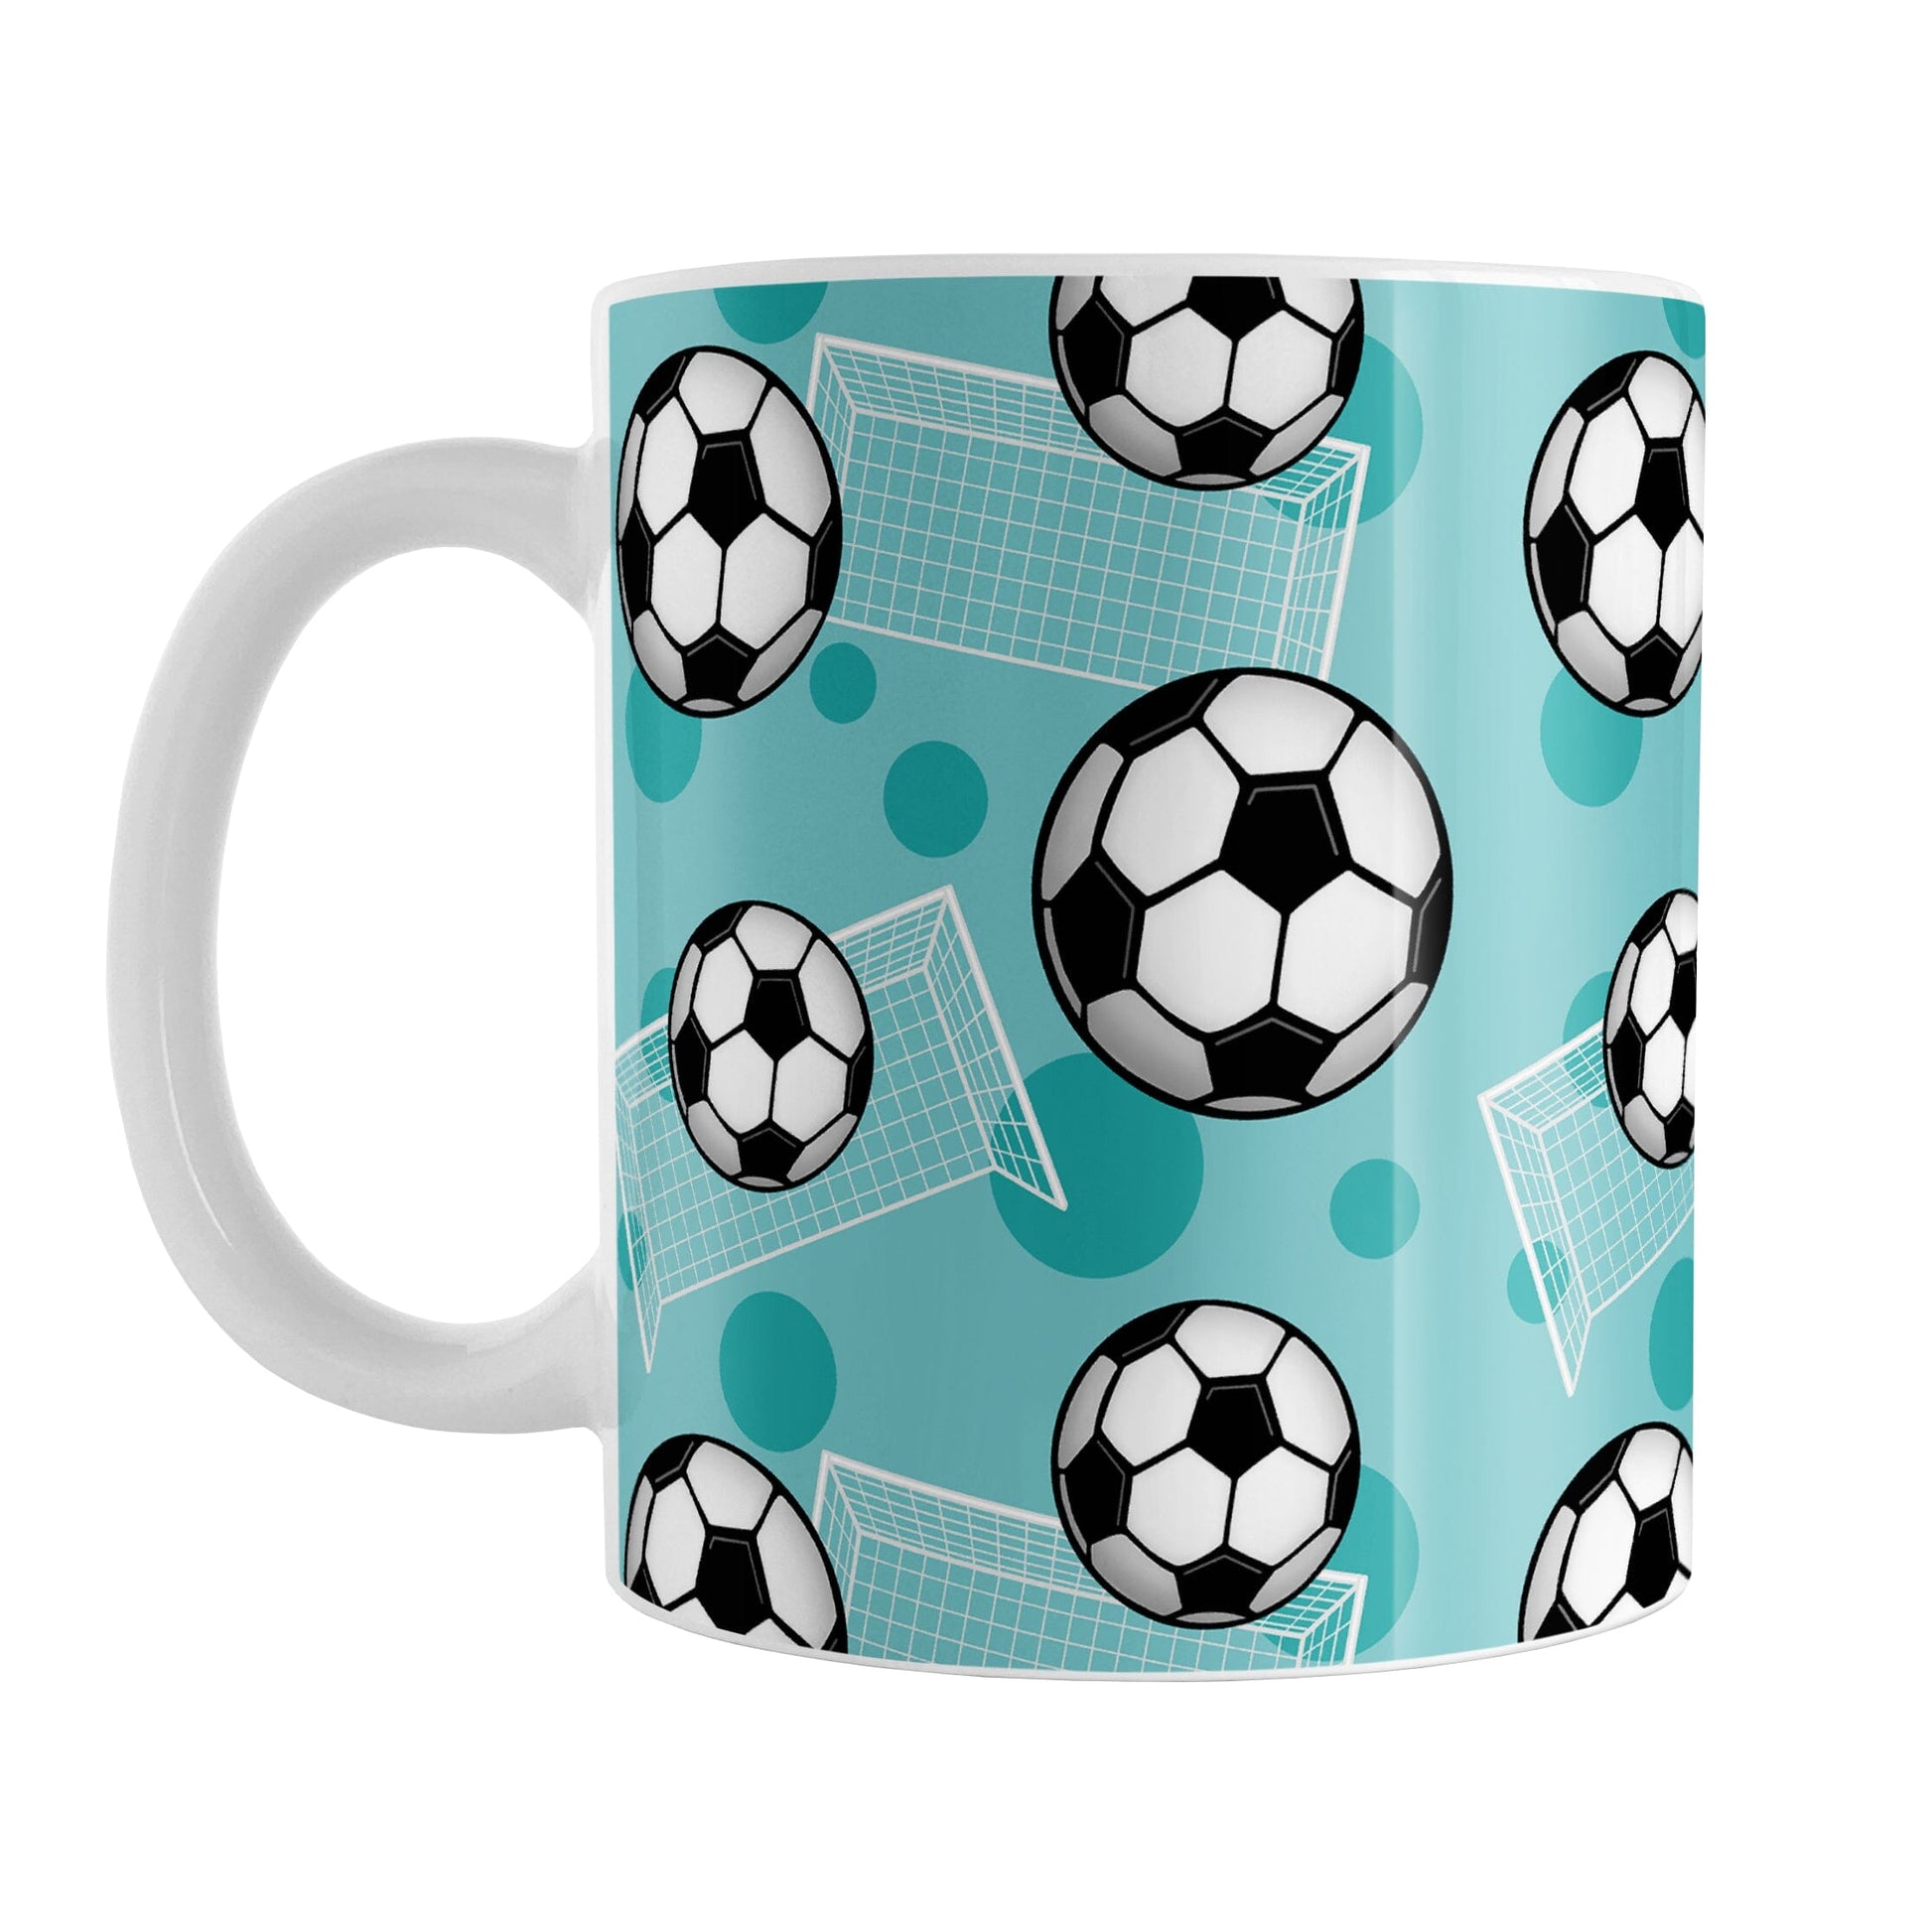 Soccer Ball and Goal Pattern Teal Mug (11oz) at Amy's Coffee Mugs. A ceramic coffee mug designed with a pattern of soccer balls and white soccer goals over a teal background with darker teal circles.